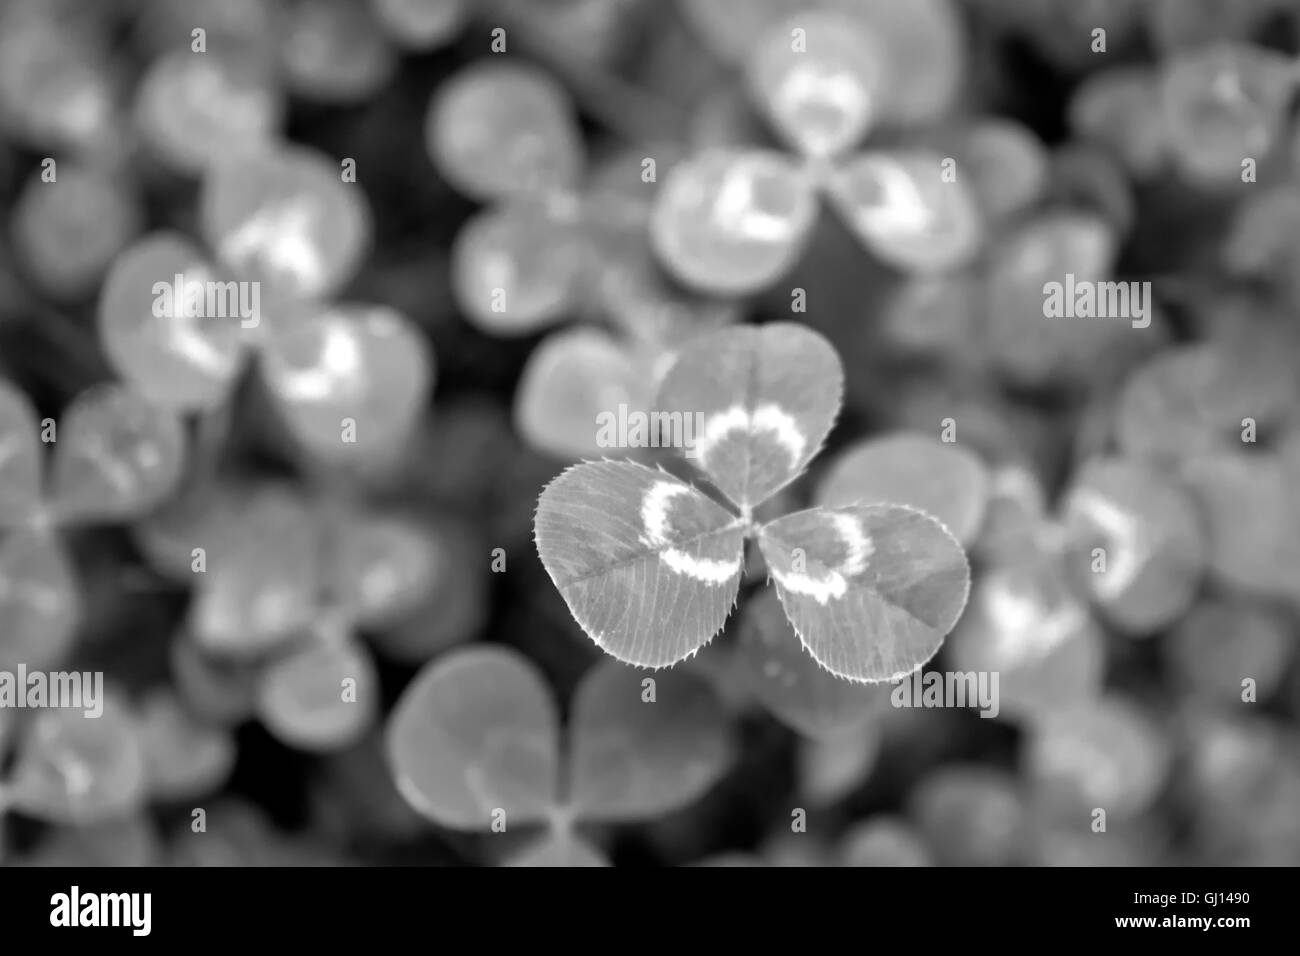 Clover leaves black and white close up patterns in nature. Stock Photo